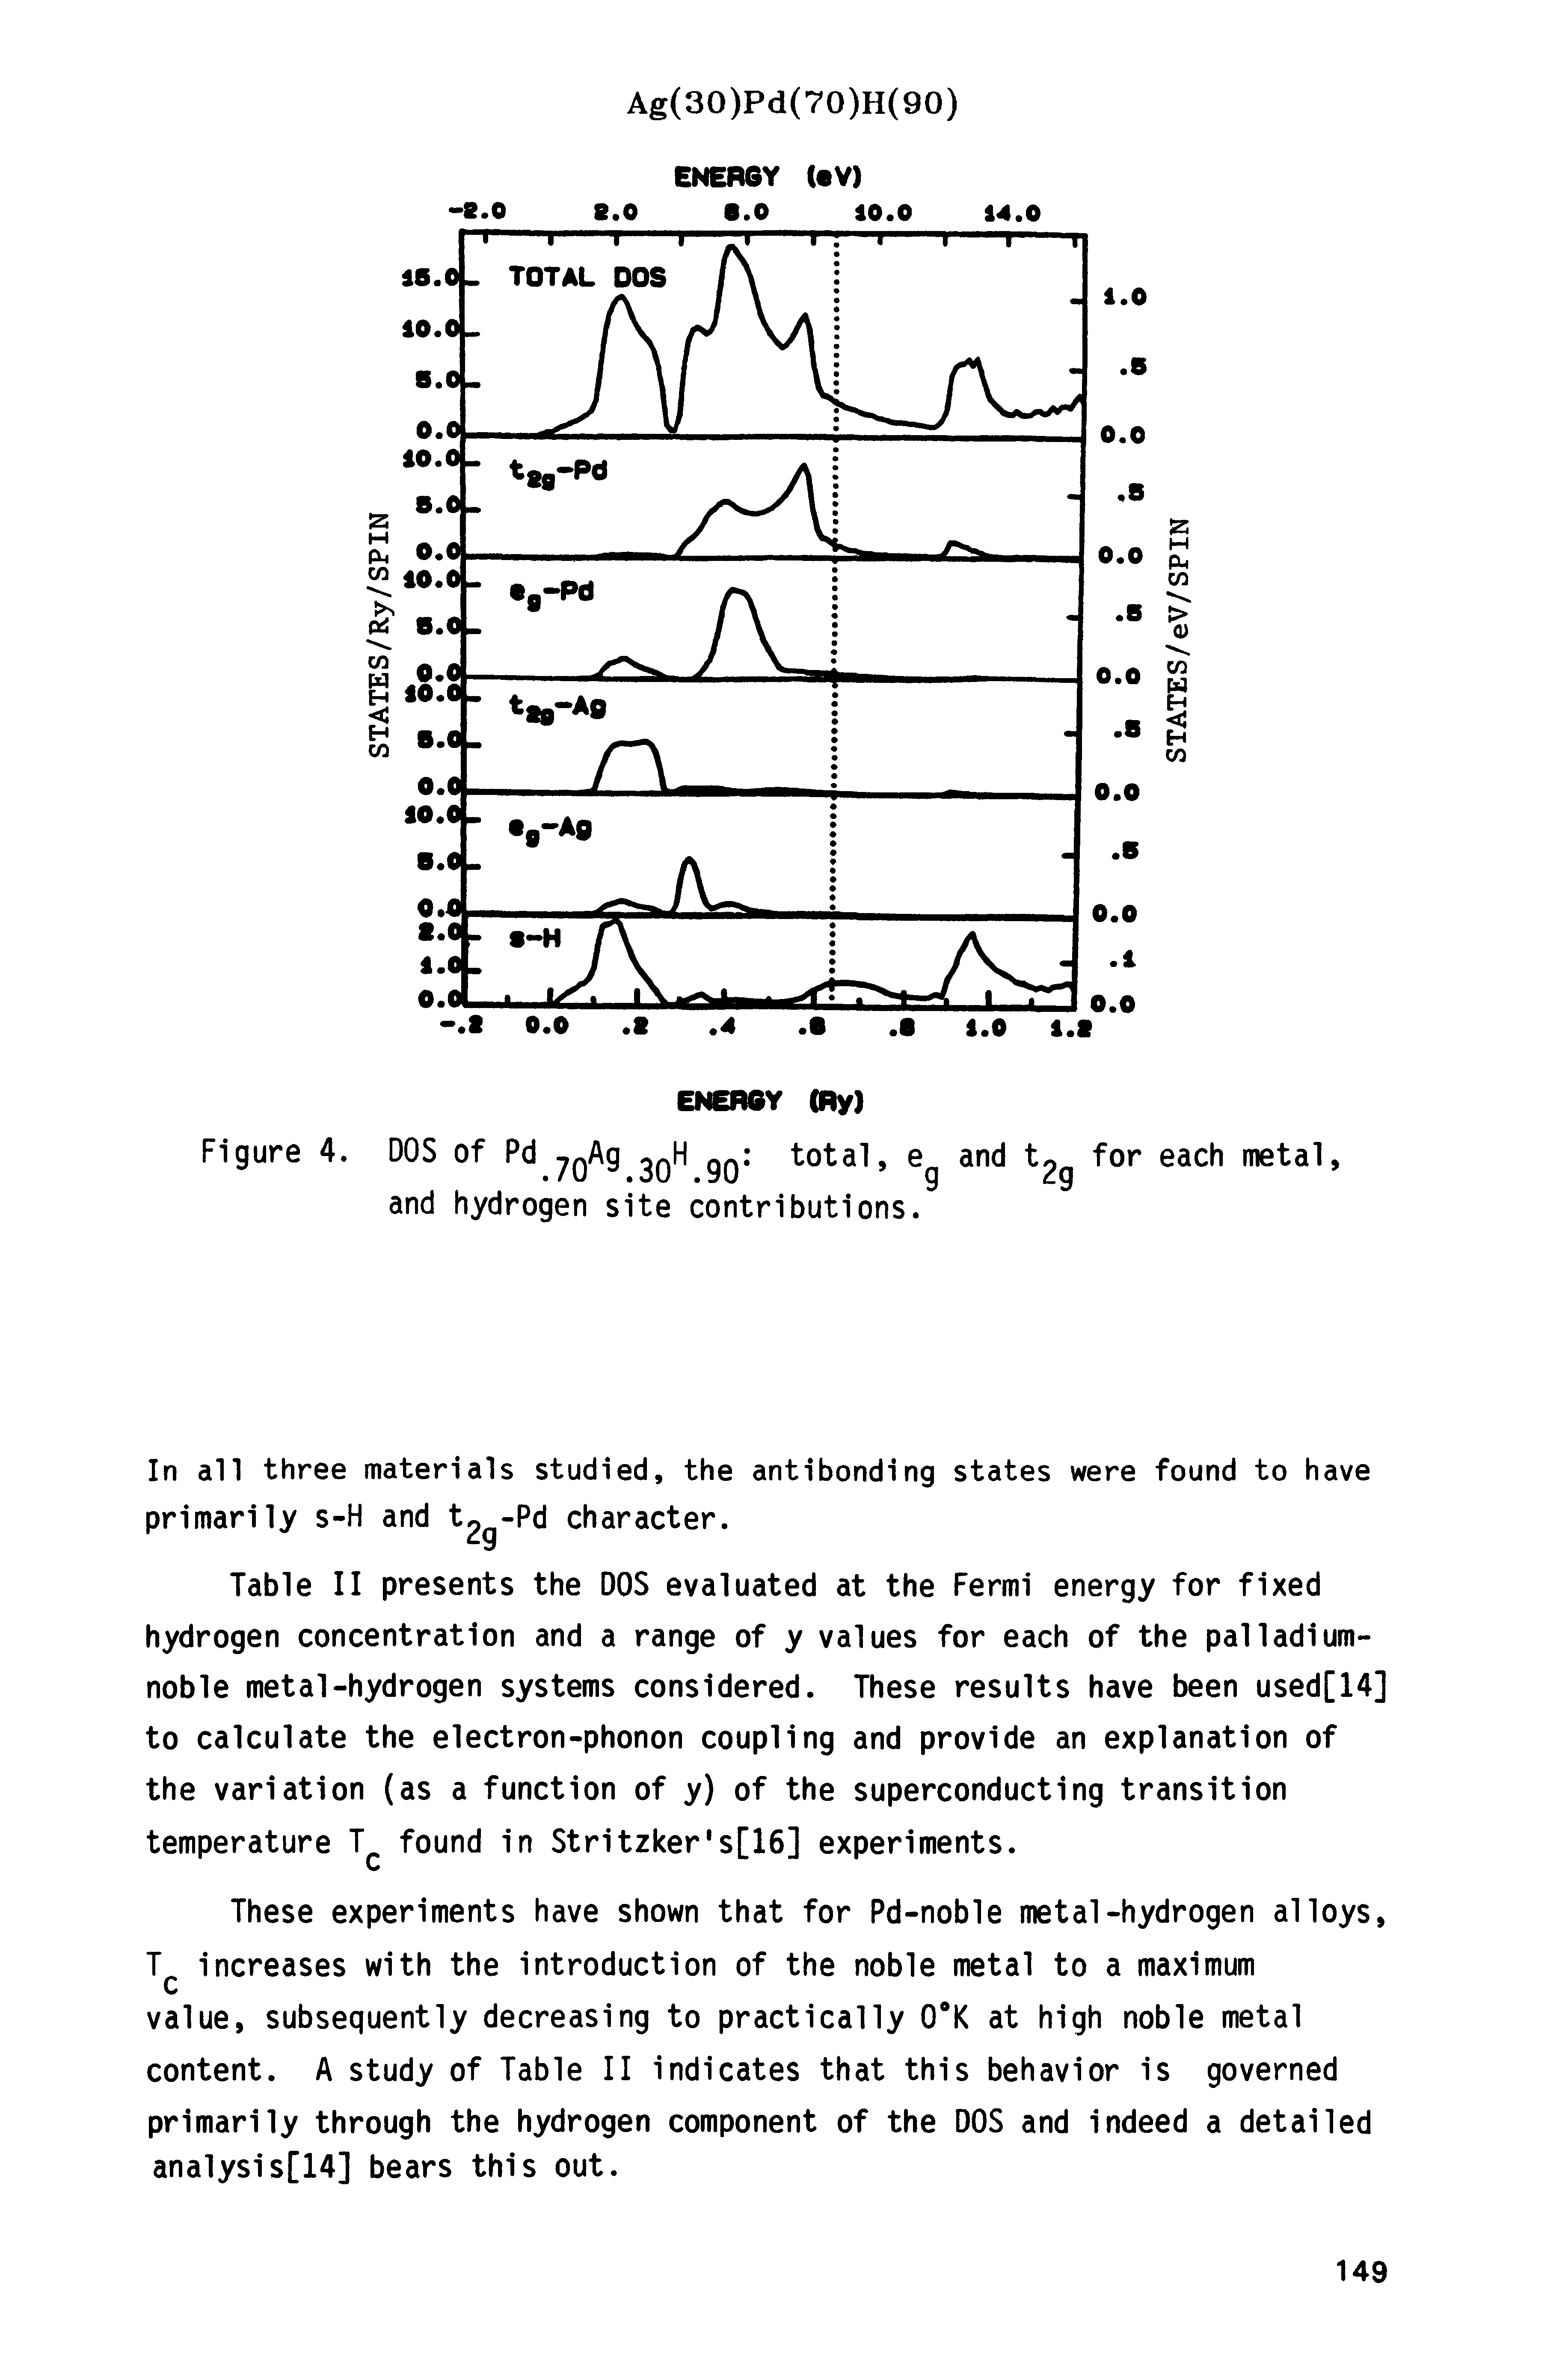 Table II presents the DOS evaluated at the Fermi energy for fixed hydrogen concentration and a range of y values for each of the palladium-noble metal-hydrogen systems considered. These results have been used[14] to calculate the electron-phonon coupling and provide an explanation of the variation (as a function of y) of the superconducting transition temperature T found in Stritzker s[16] experiments.